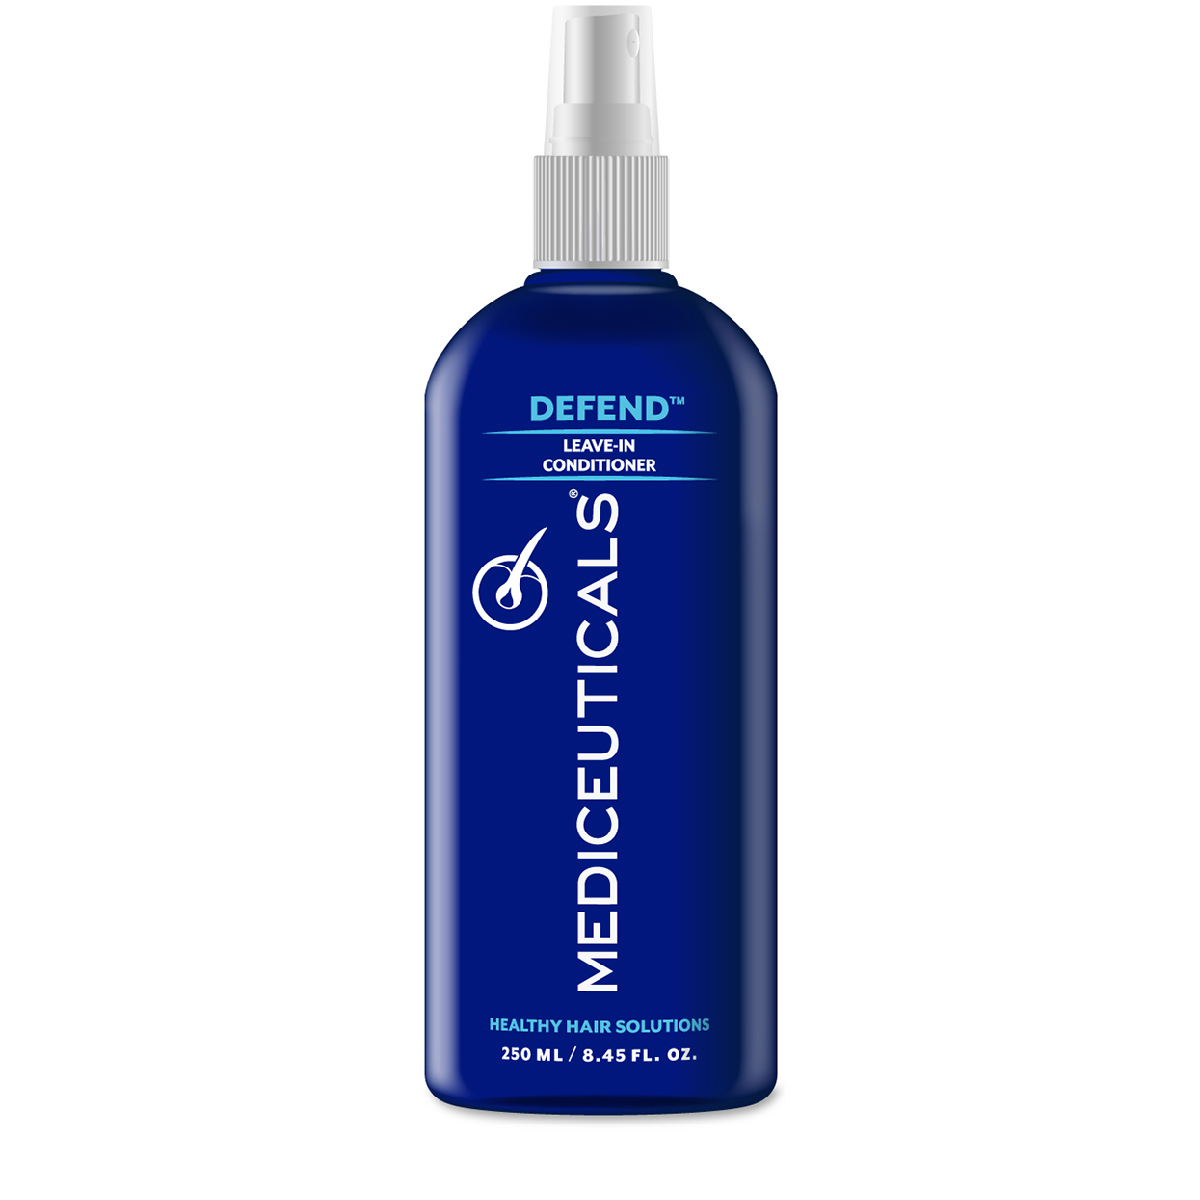 Leave-in conditioner spray